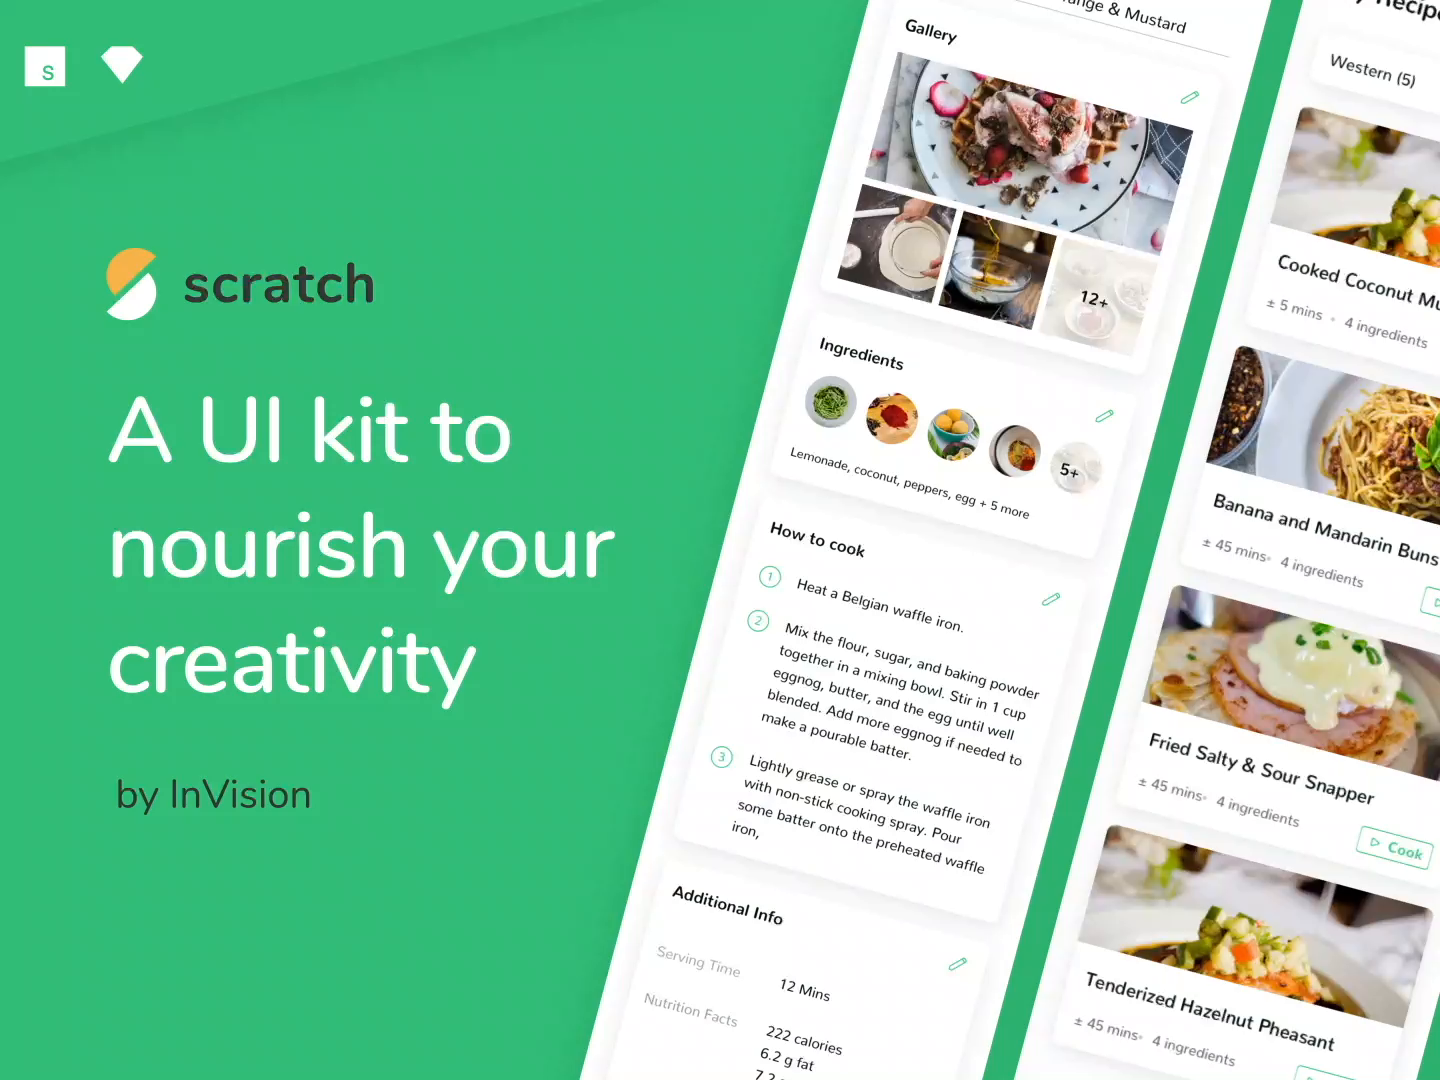 UI Kits design idea #196: Scratch—A UI Kit to nourish your creativity by InVision